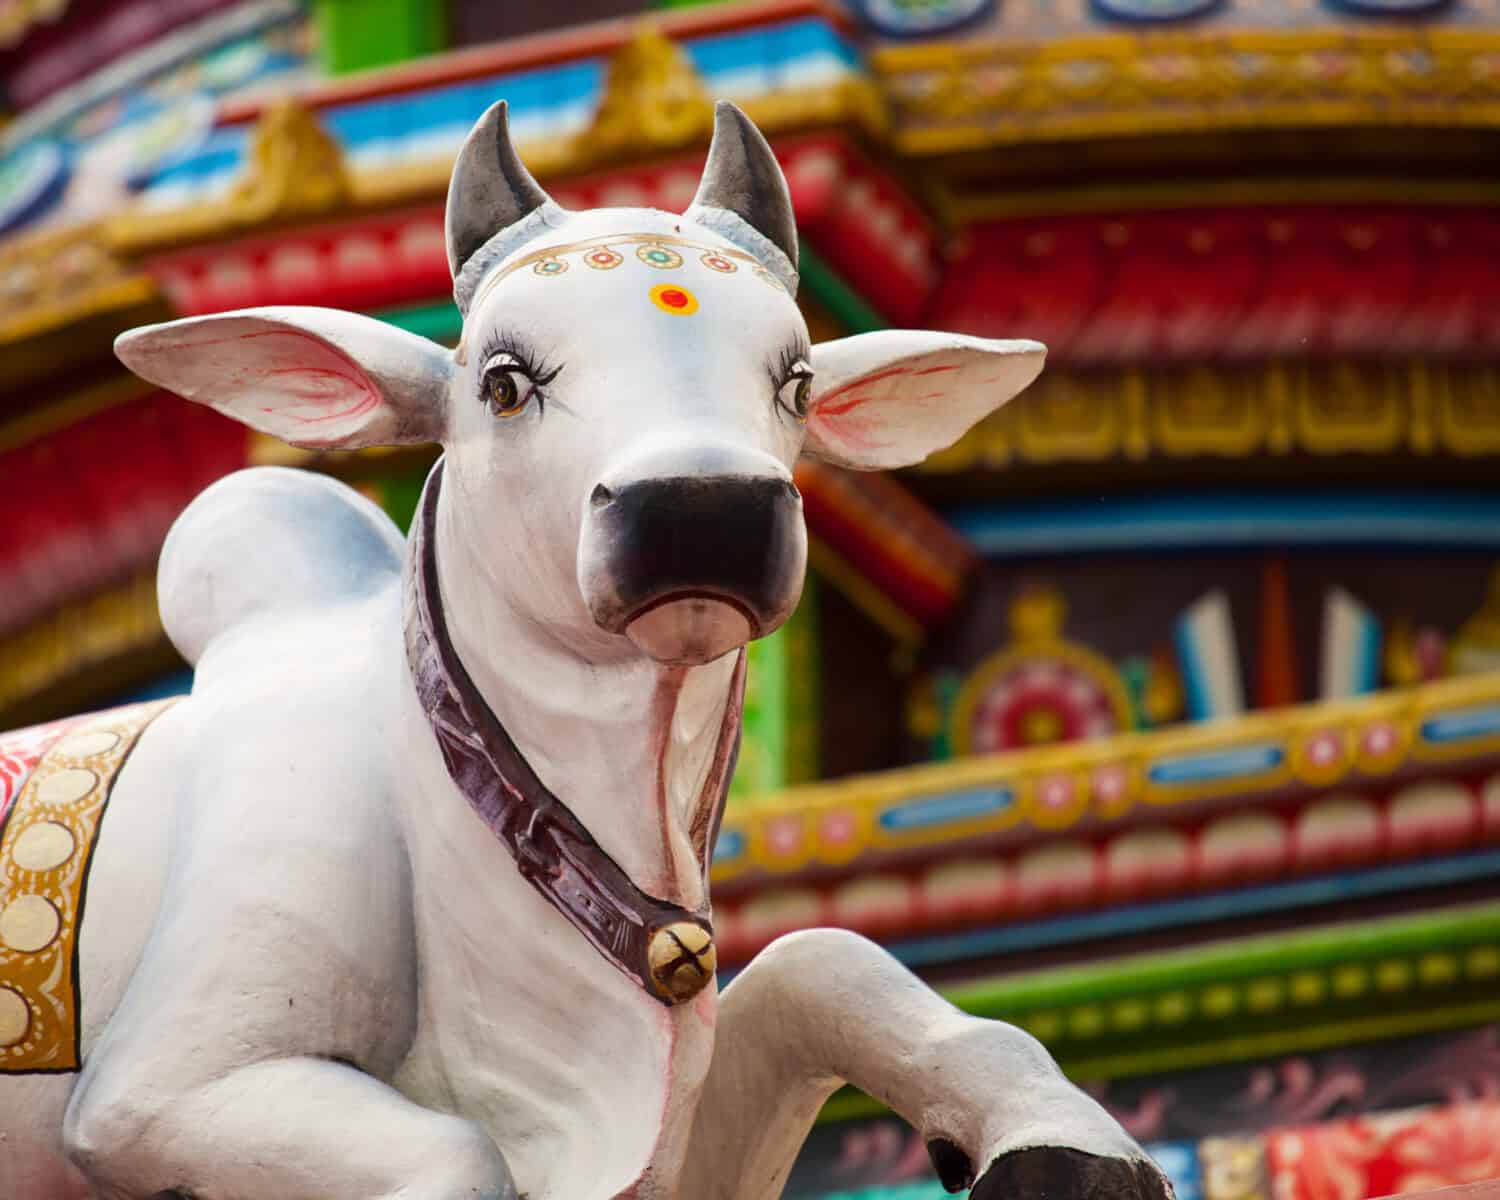 A sacred Hindu cow statue at the Sri Mariamman Temple in Chinatown, Singapore